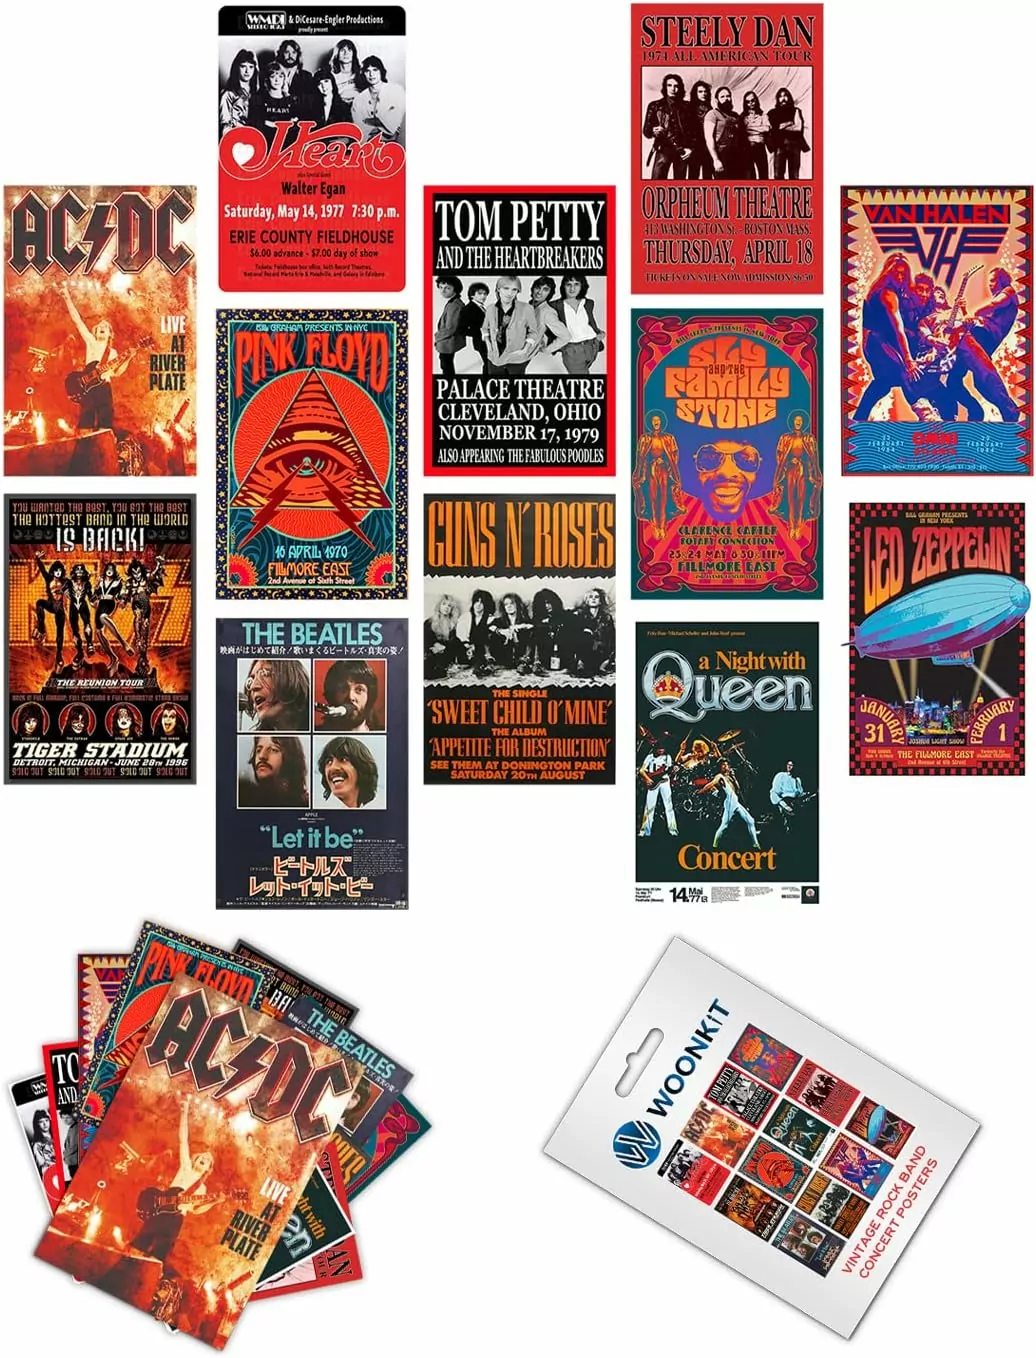 Rock music Metal wall plaque Retro vintage band concert poster